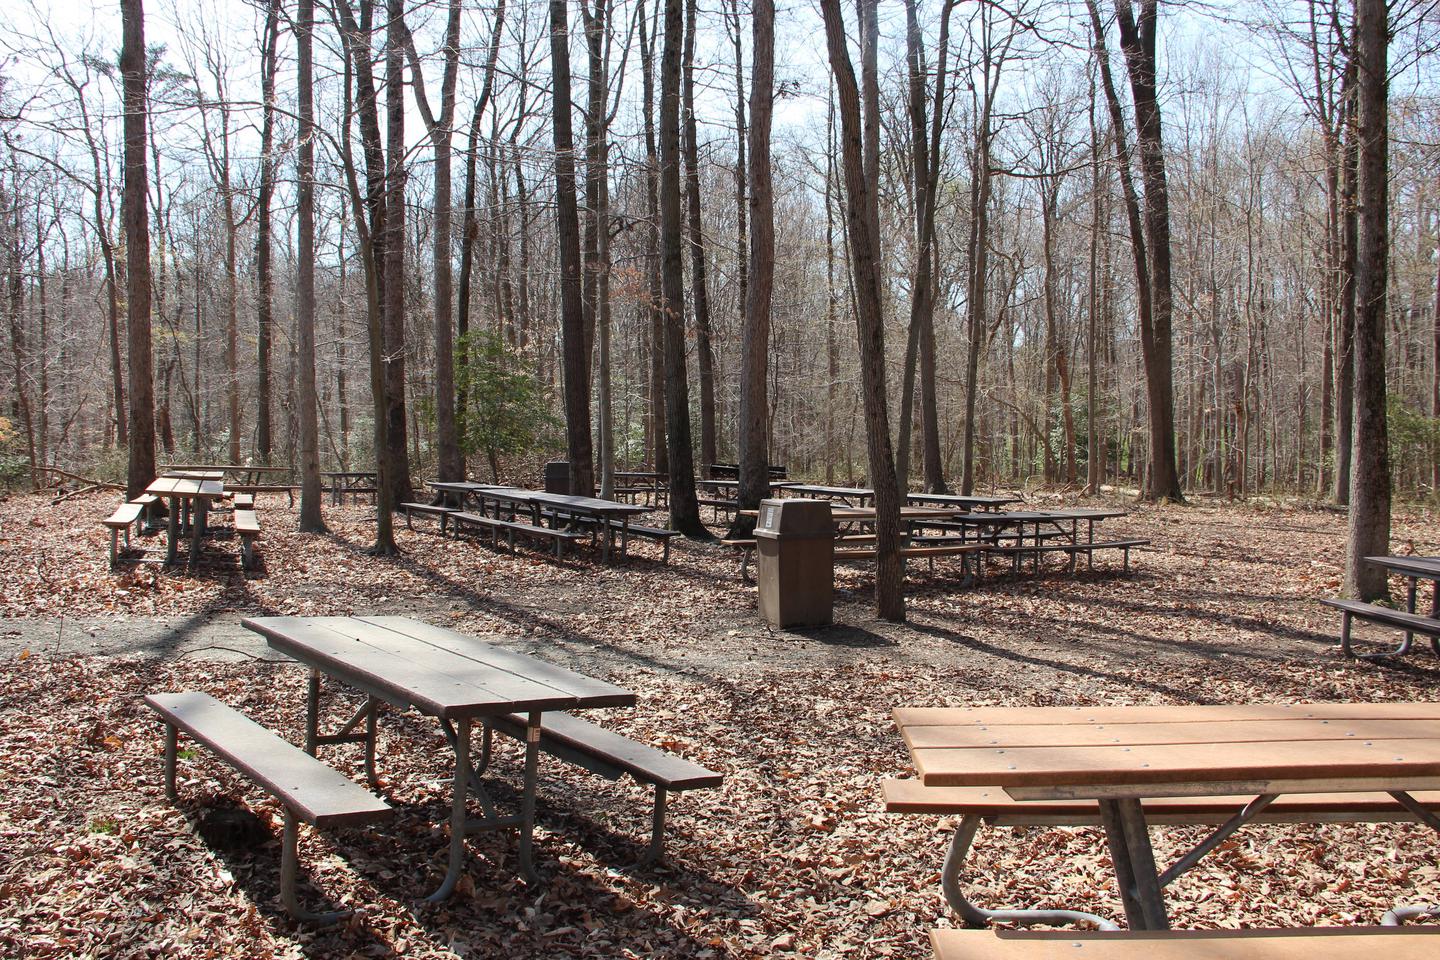 Laurel Reserved Picnic Area picnic tables  Greenbelt Park Maryland Laurel Reserved Picnic Area  Greenbelt Park Maryland 